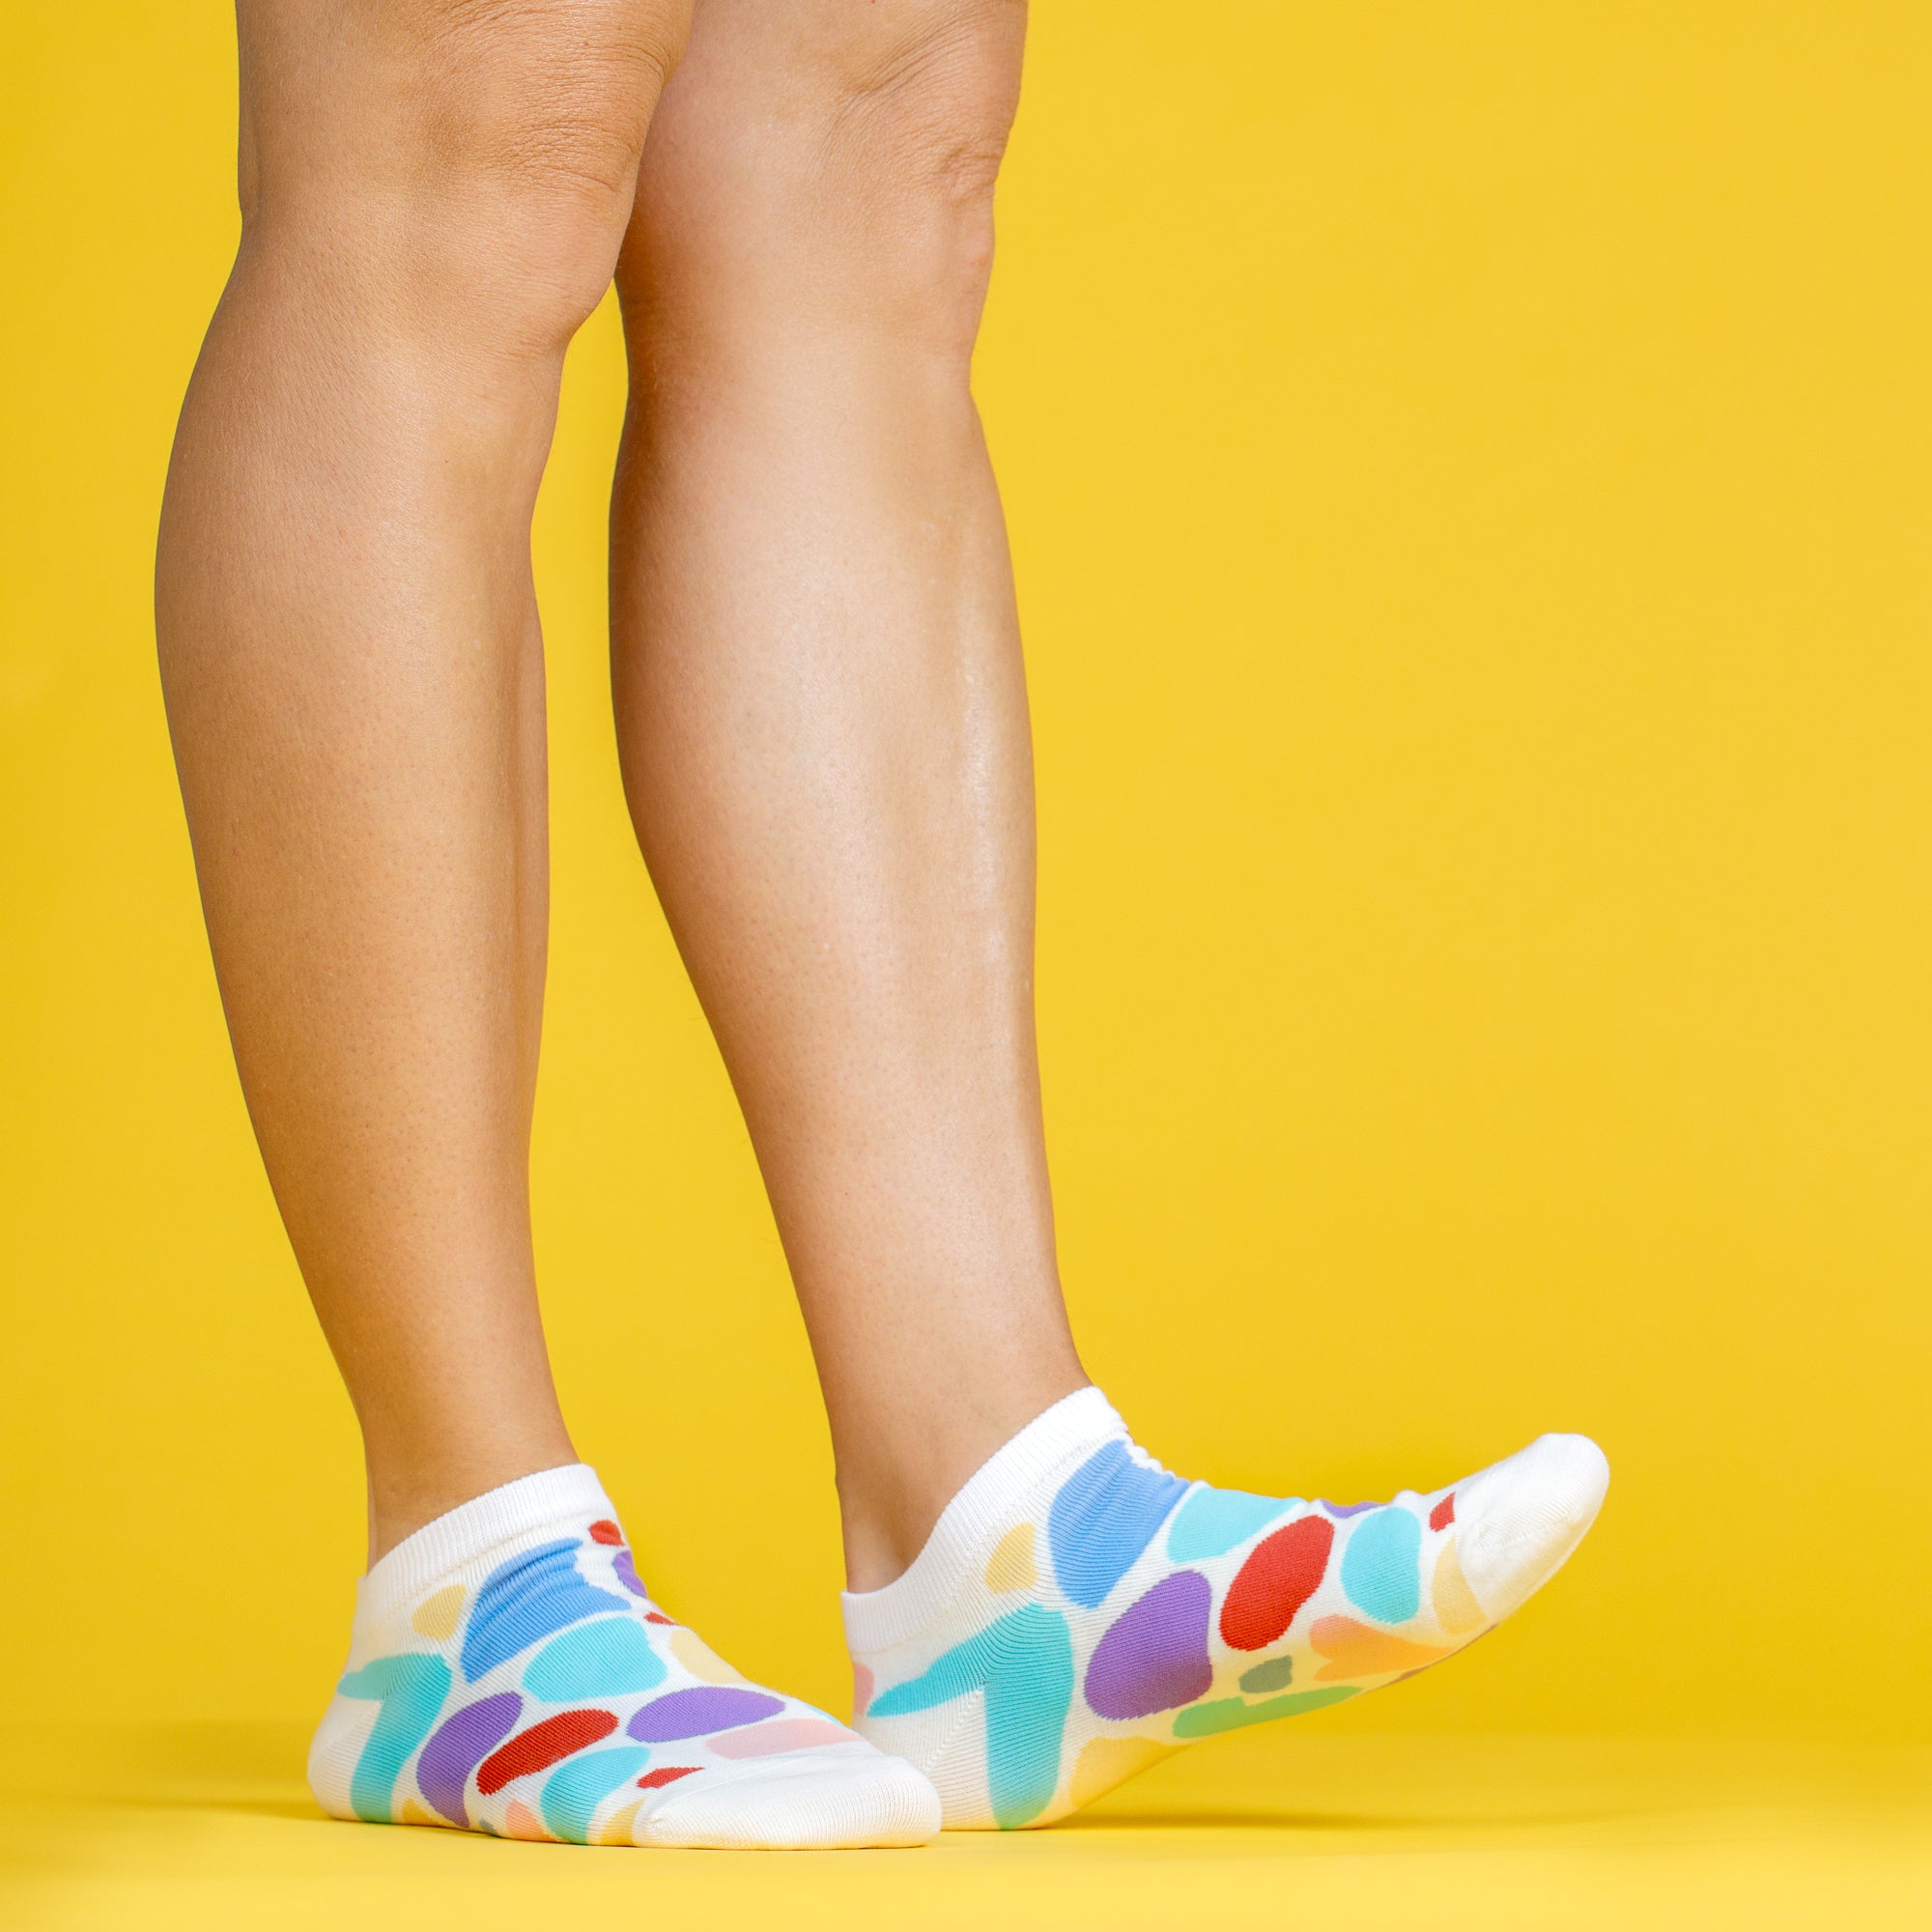 A yellow background showing two legs from the knee down, wearing ankle socks from the Awesome Socks Club with colorful blobs on them.